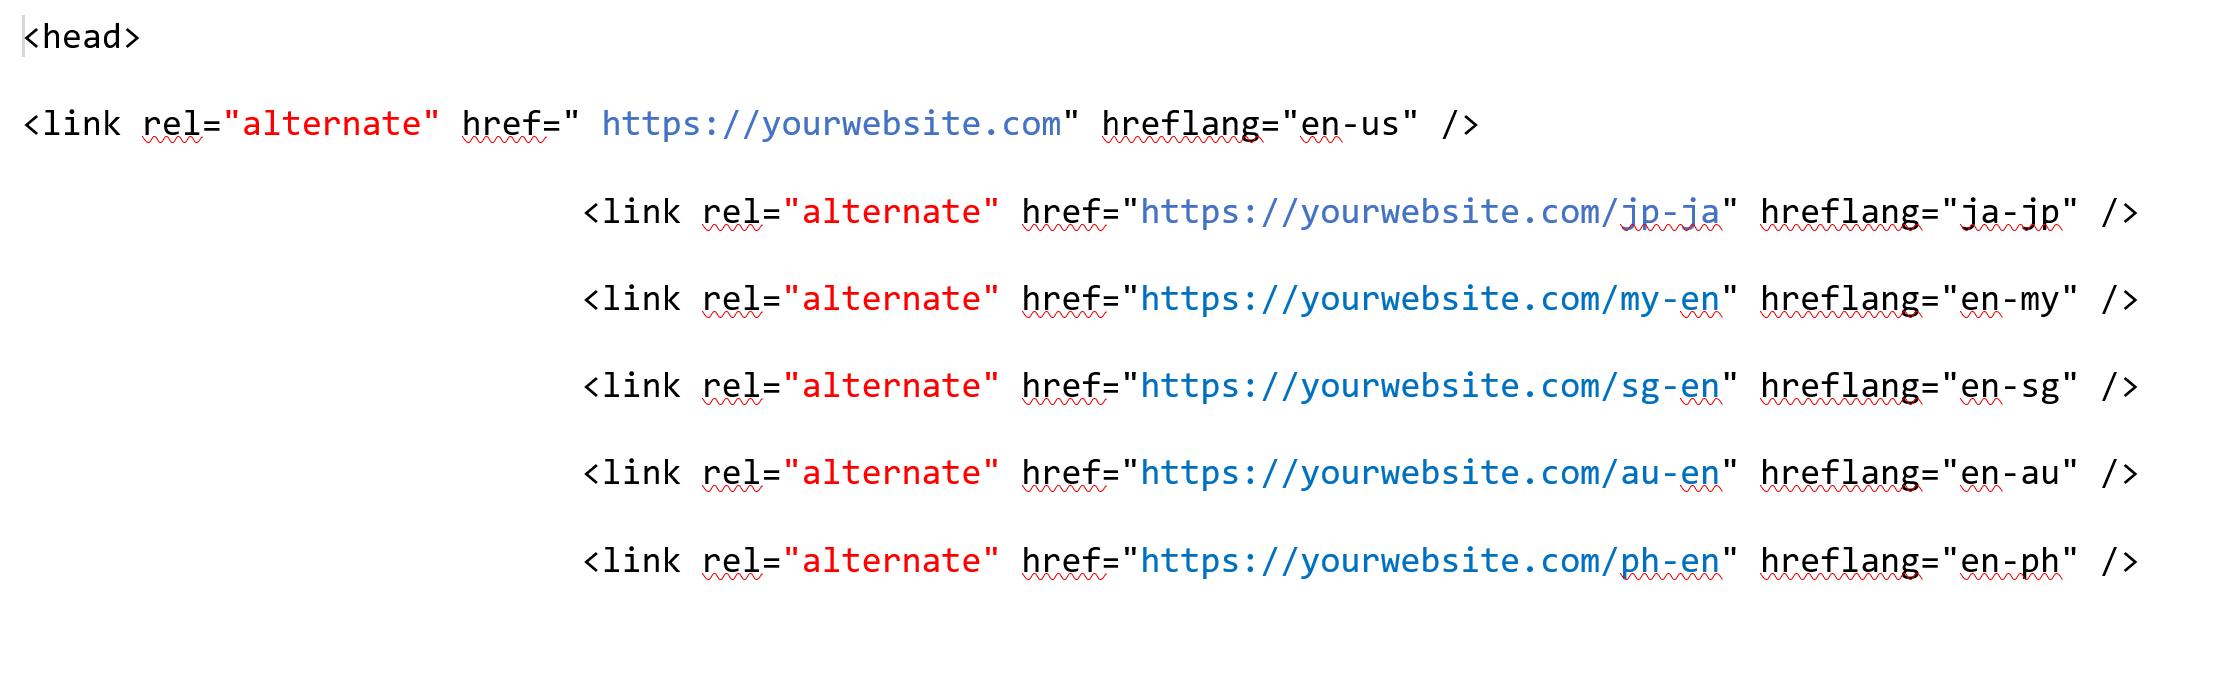 The Hreflang Ultimate Guide – All You Need to Know About Hreflang Tag Implementation